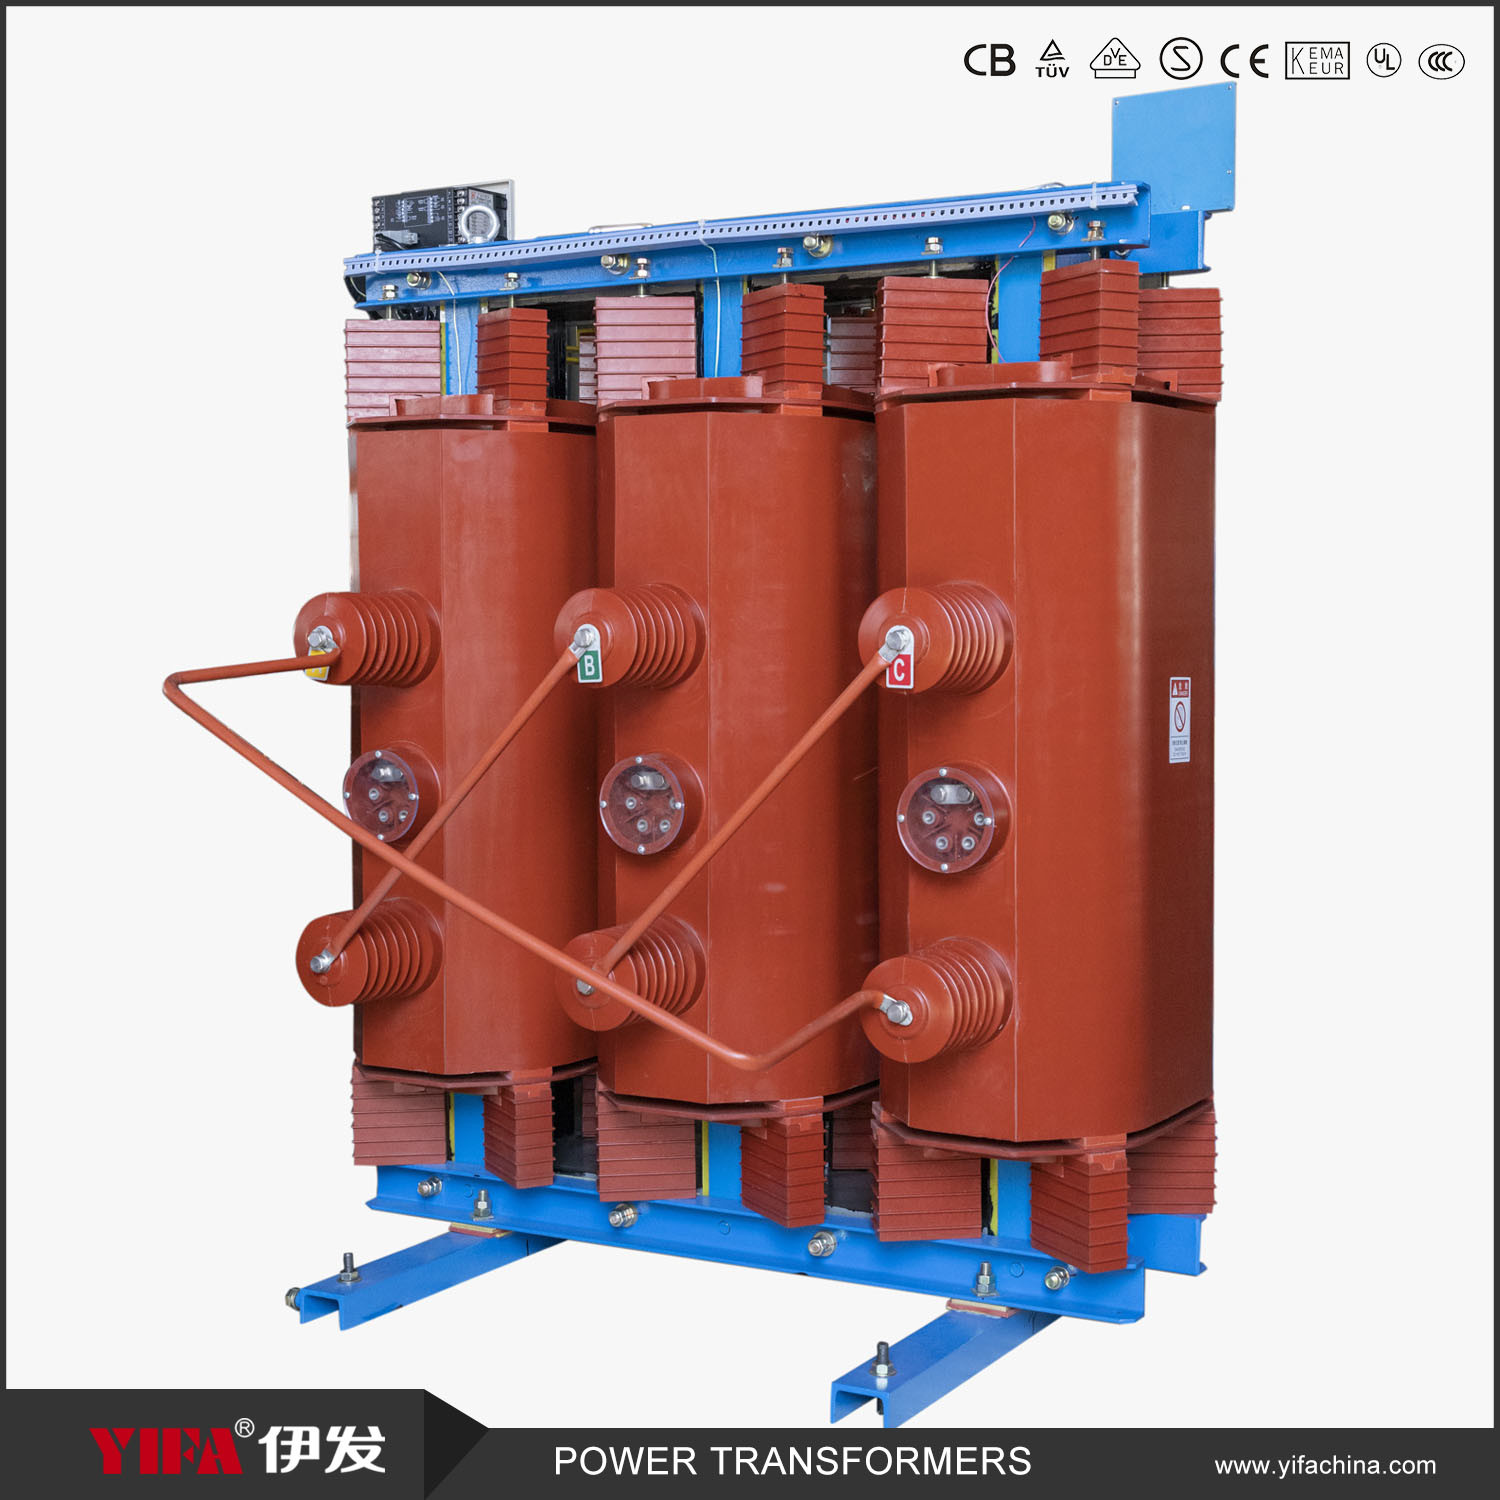 Transformer - China Power Transformer, Dry Type Transformer Manufacturers/Suppliers on Made-in-China.com